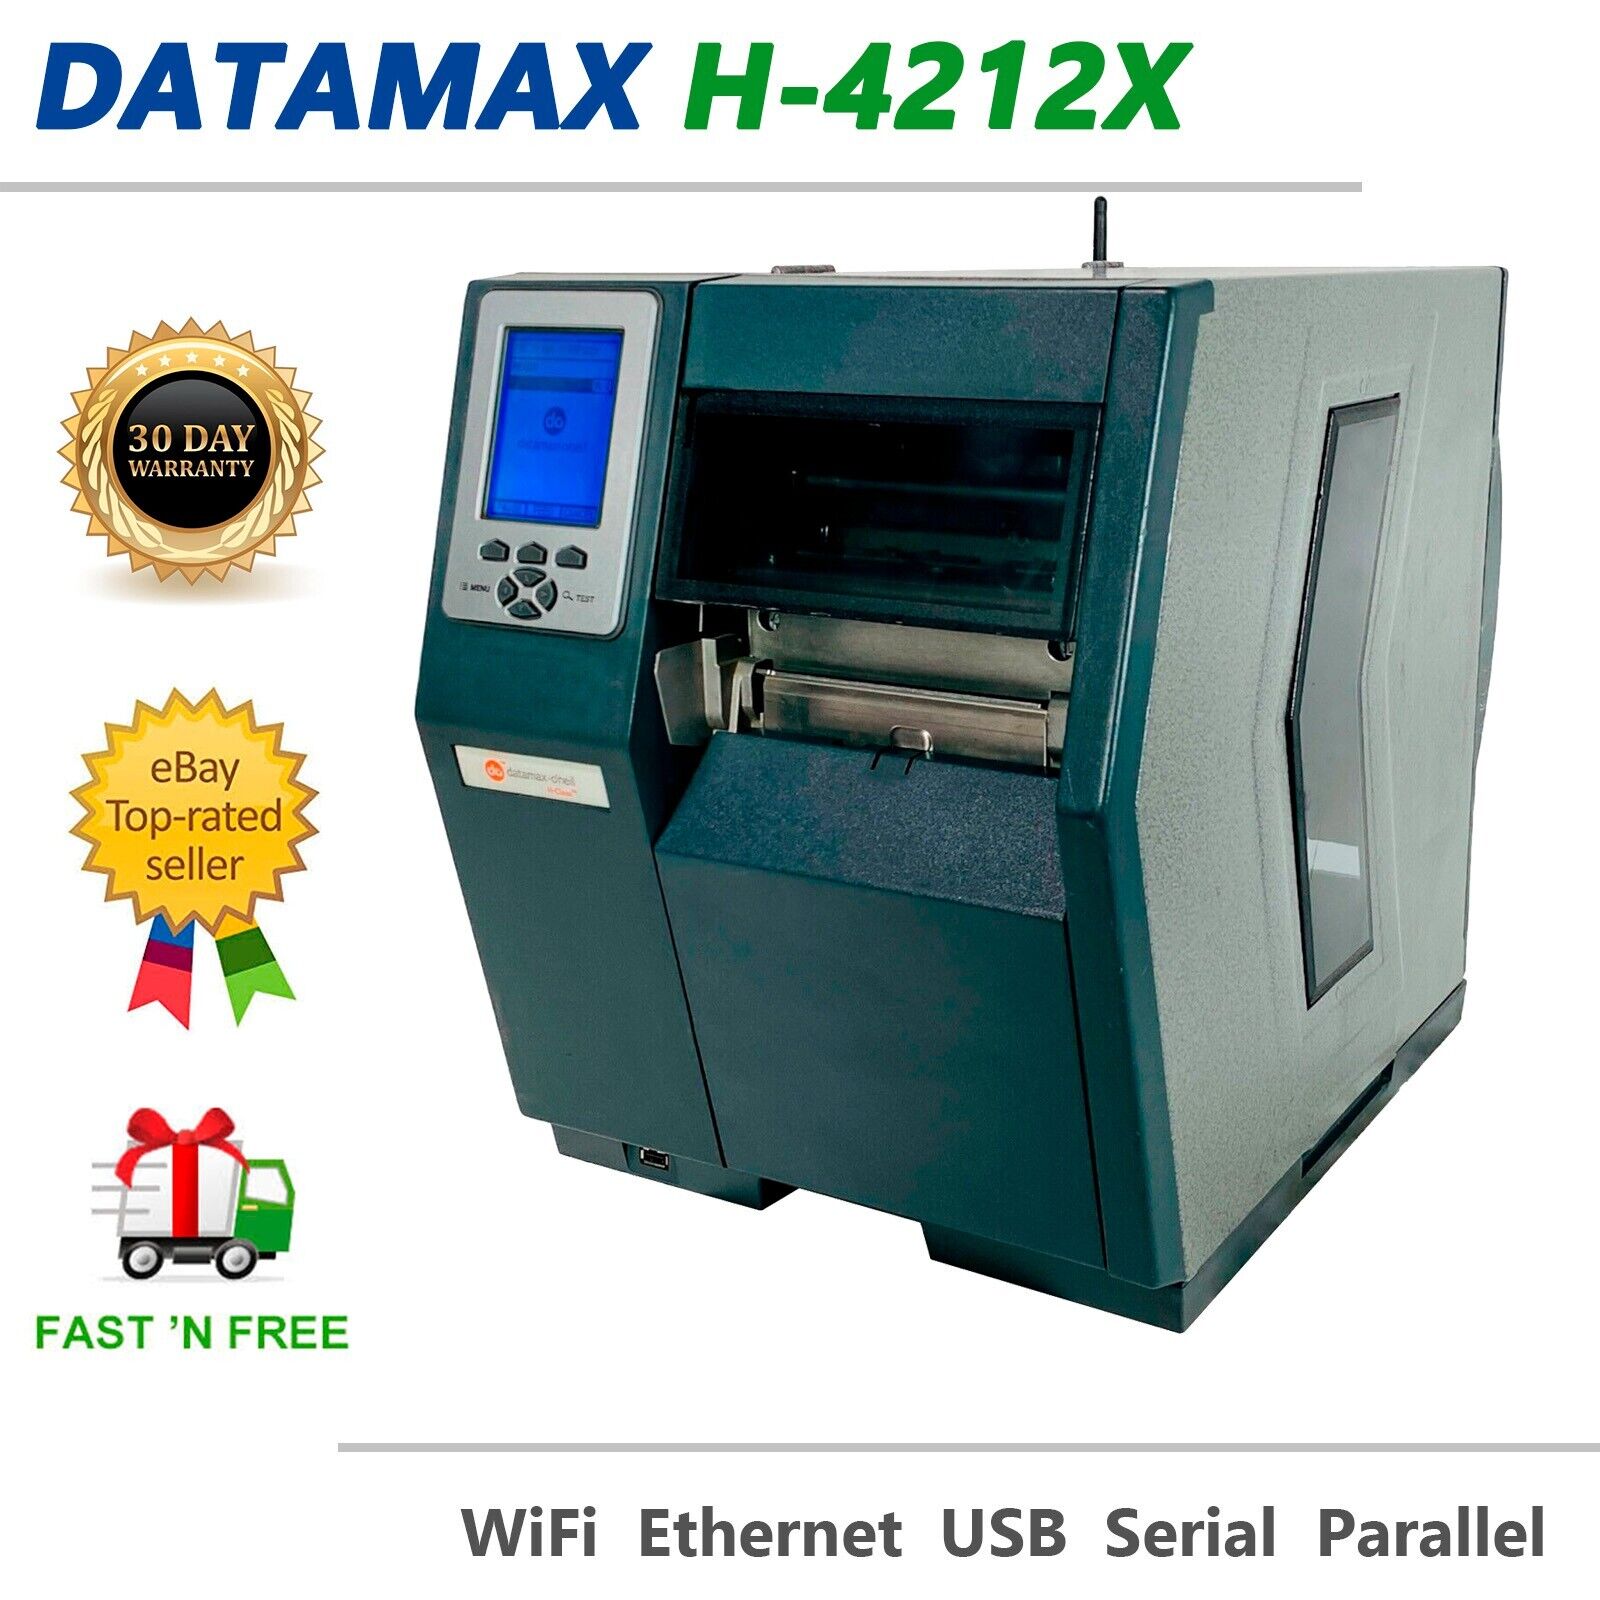 Datamax H-4212X Printer High-Speed Labeling Solution for Business FULLY TESTED